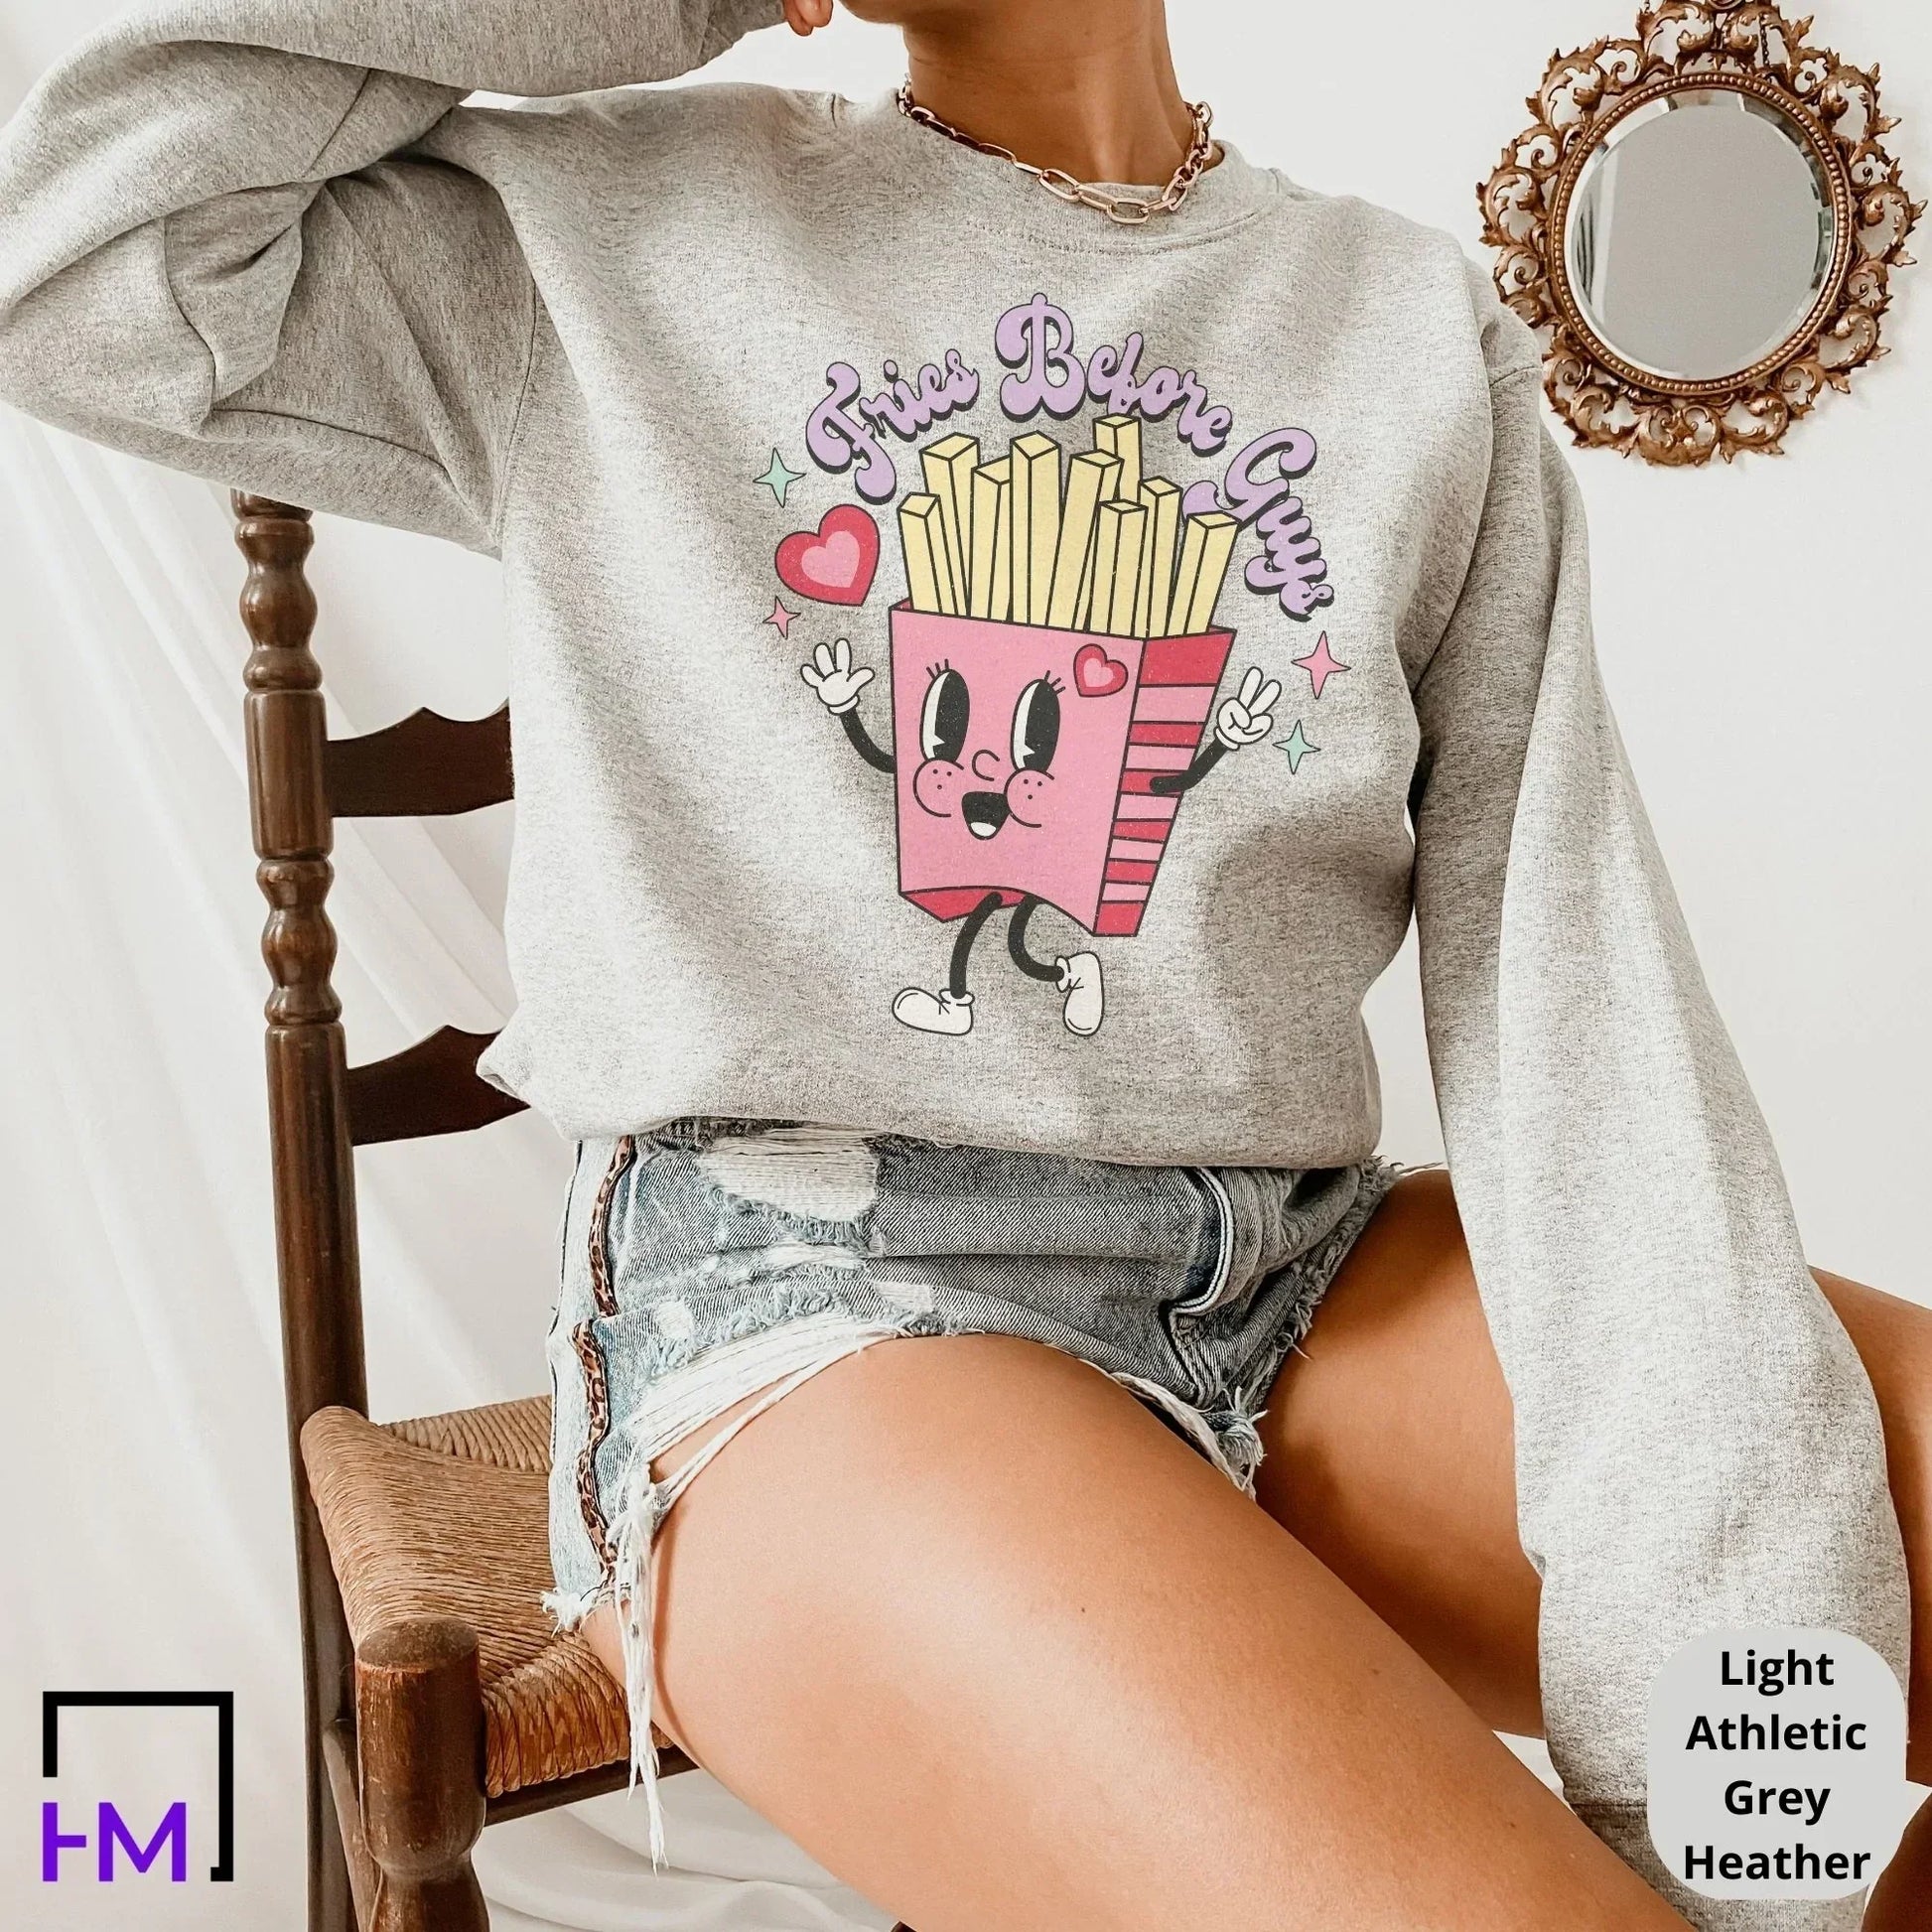 Fries Before Guys, Funny Valentine's Day Shirt, Bestie Valentine's Gift for Her, Love Shirts for Women, Cute V-Day Shirt, Proud to Be Single, Self Love Shirt HMDesignStudioUS